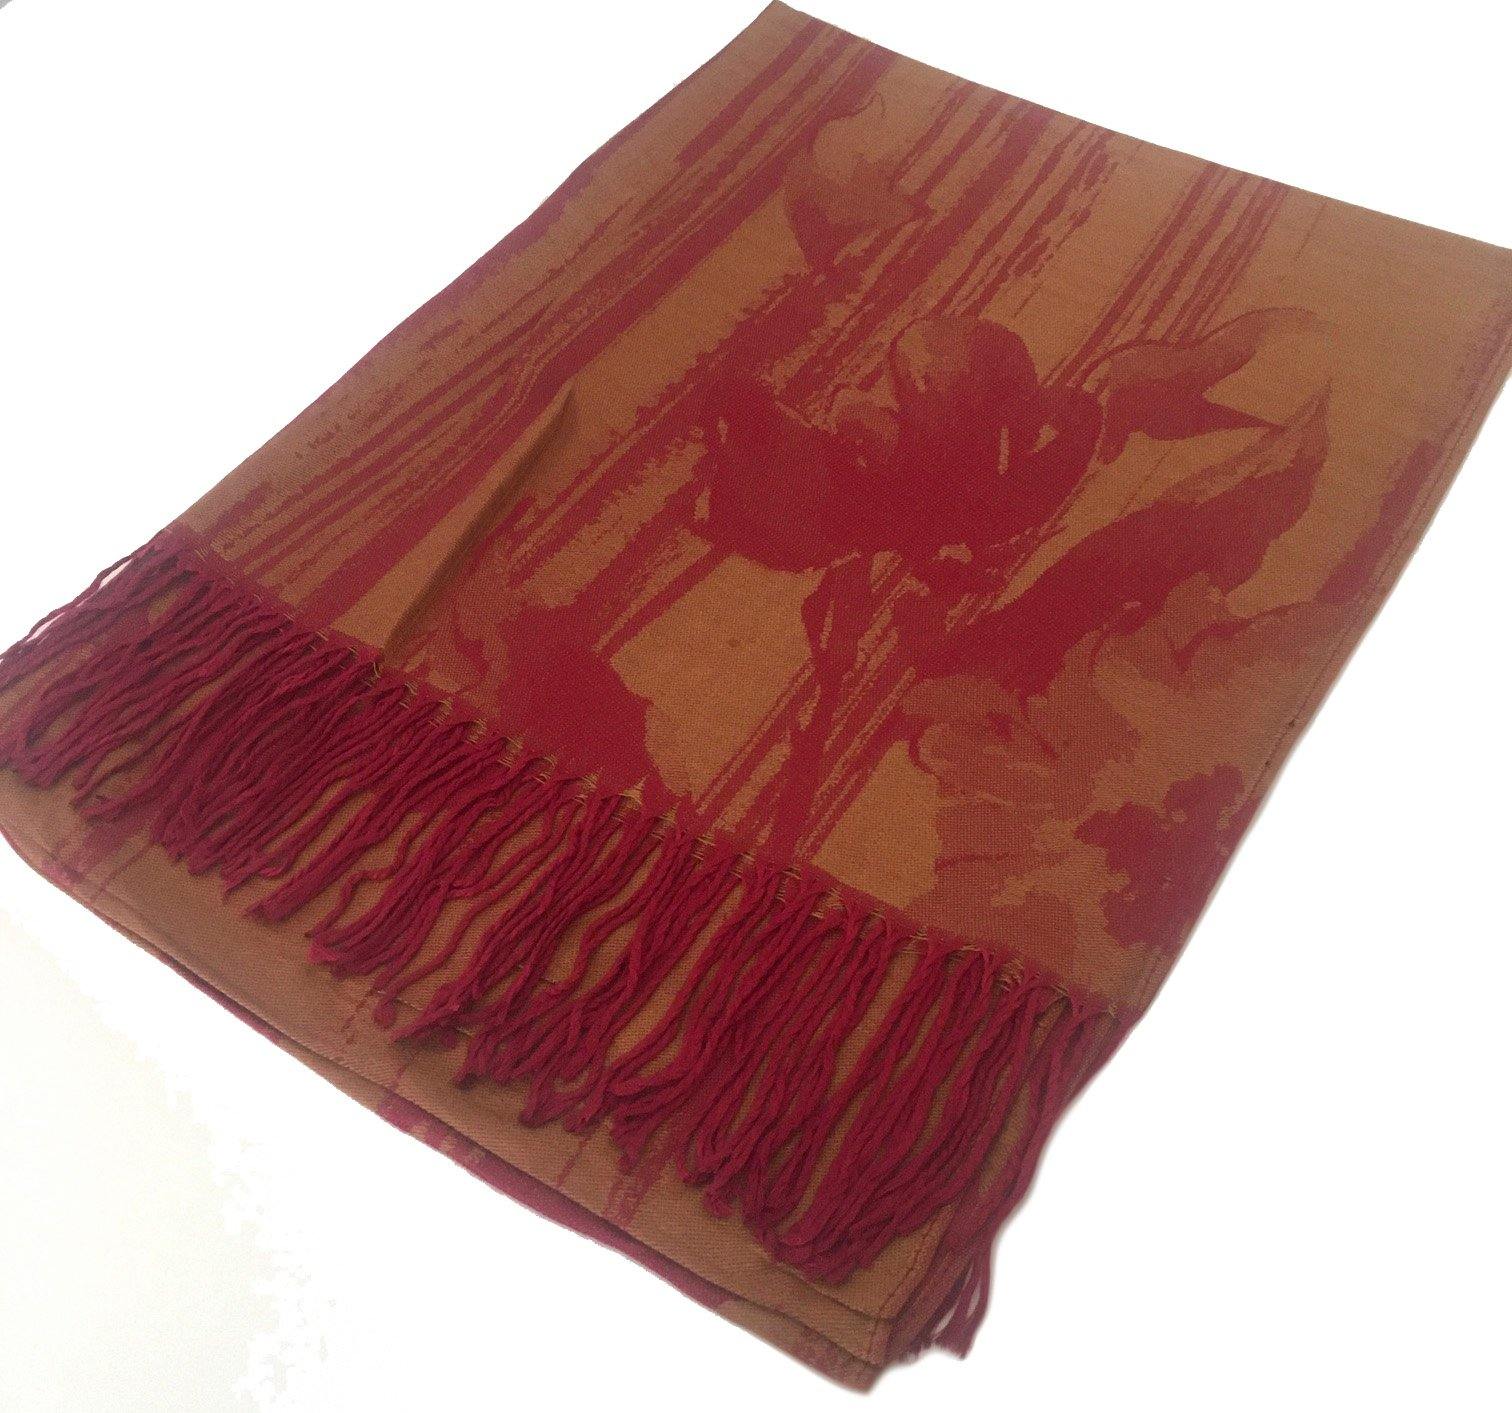 A-SHU BERRY BRONZE REVERSIBLE PASHMINA SHAWL SCARF IN ABSTRACT FLORAL PRINT - A-SHU.CO.UK